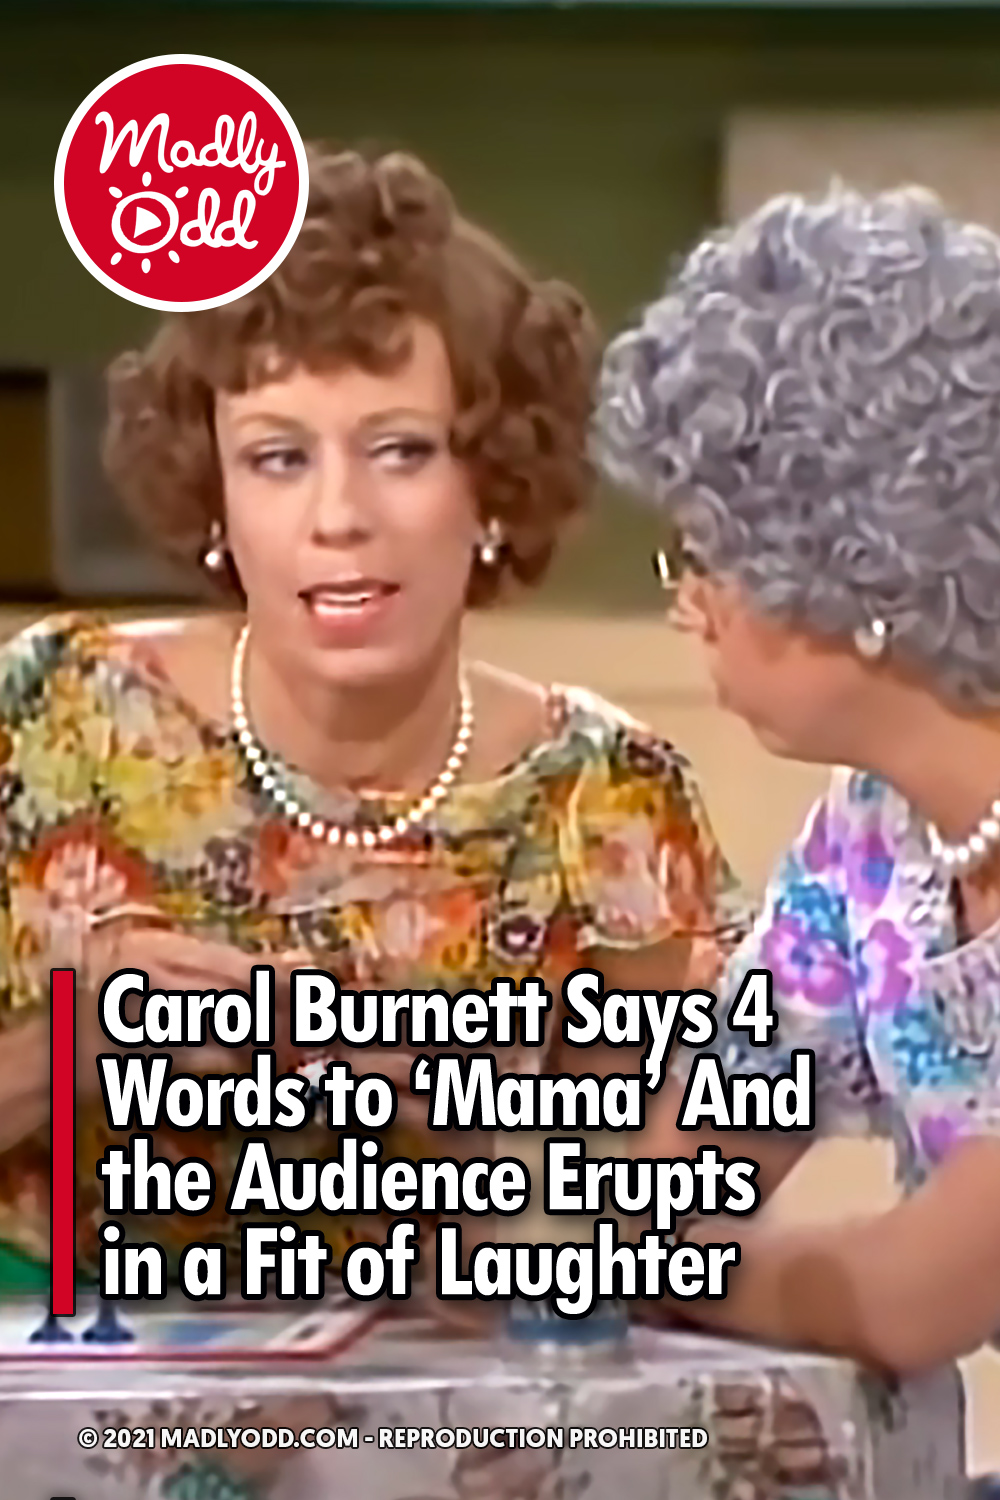 Carol Burnett Says 4 Words to \'Mama\' And the Audience Erupts in a Fit of Laughter